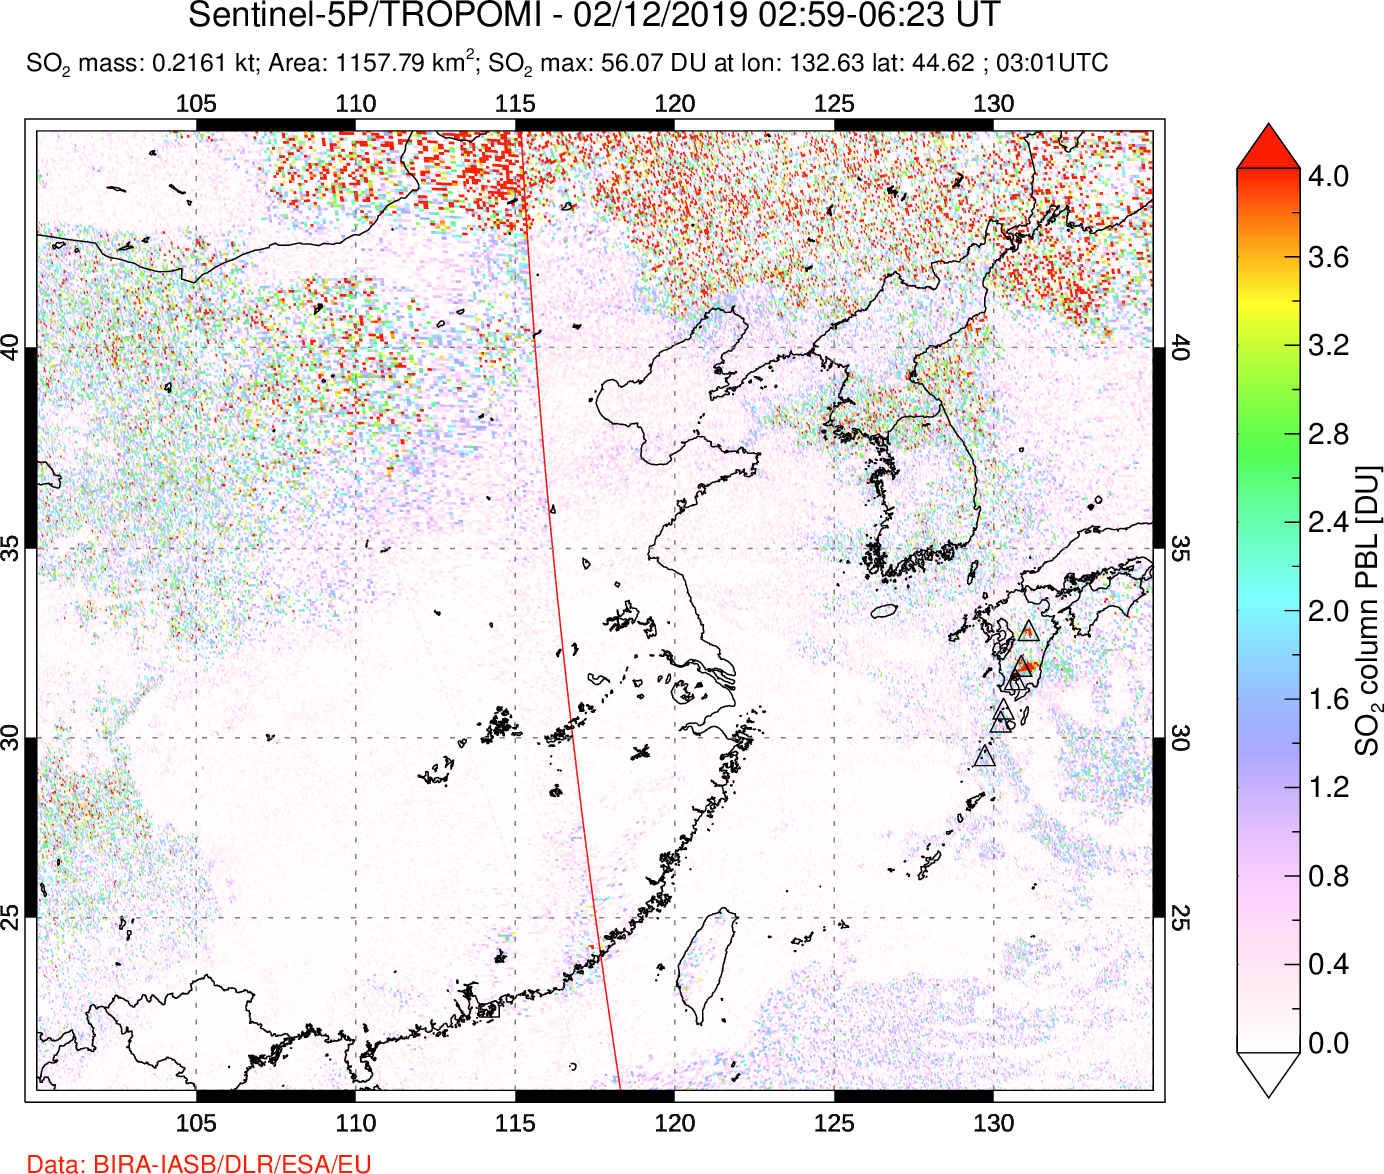 A sulfur dioxide image over Eastern China on Feb 12, 2019.